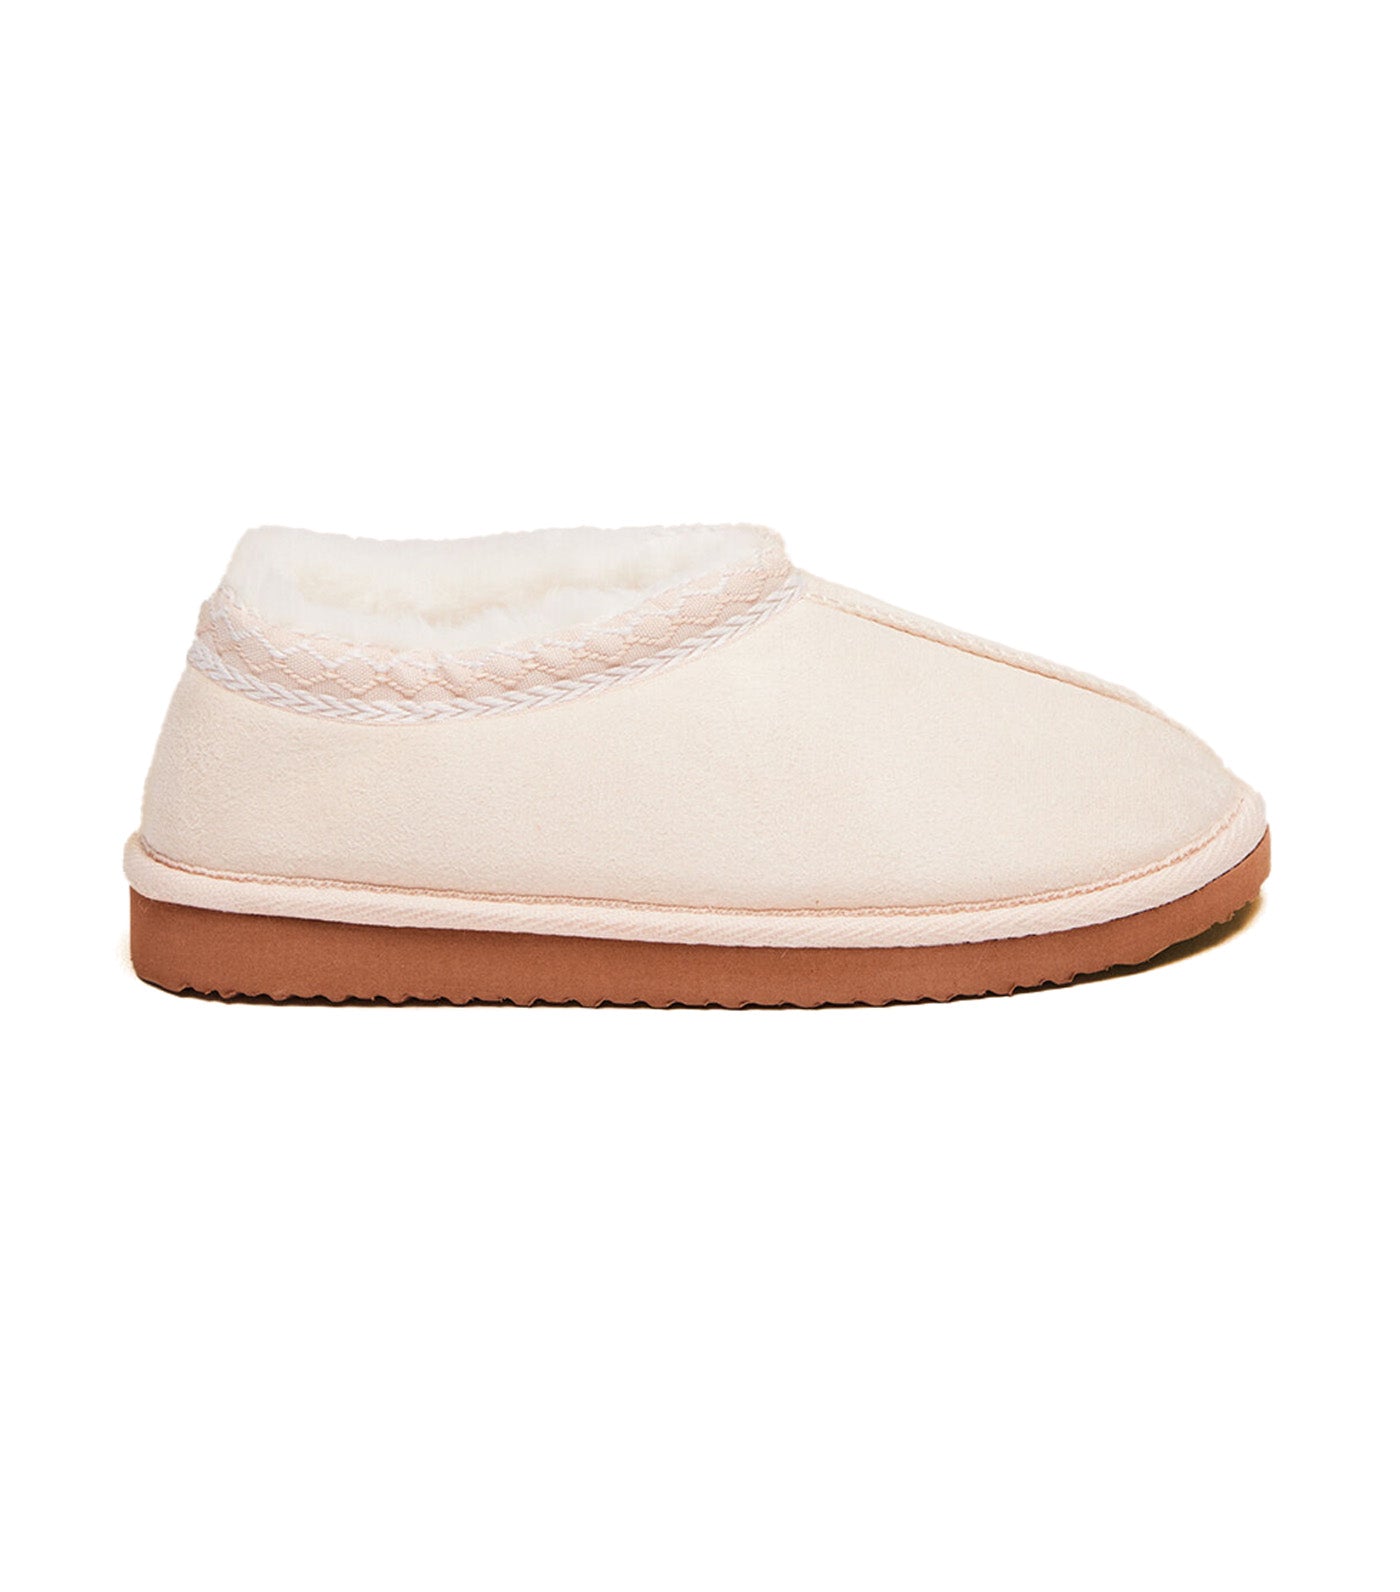 Boot-Type House Slippers Ivory